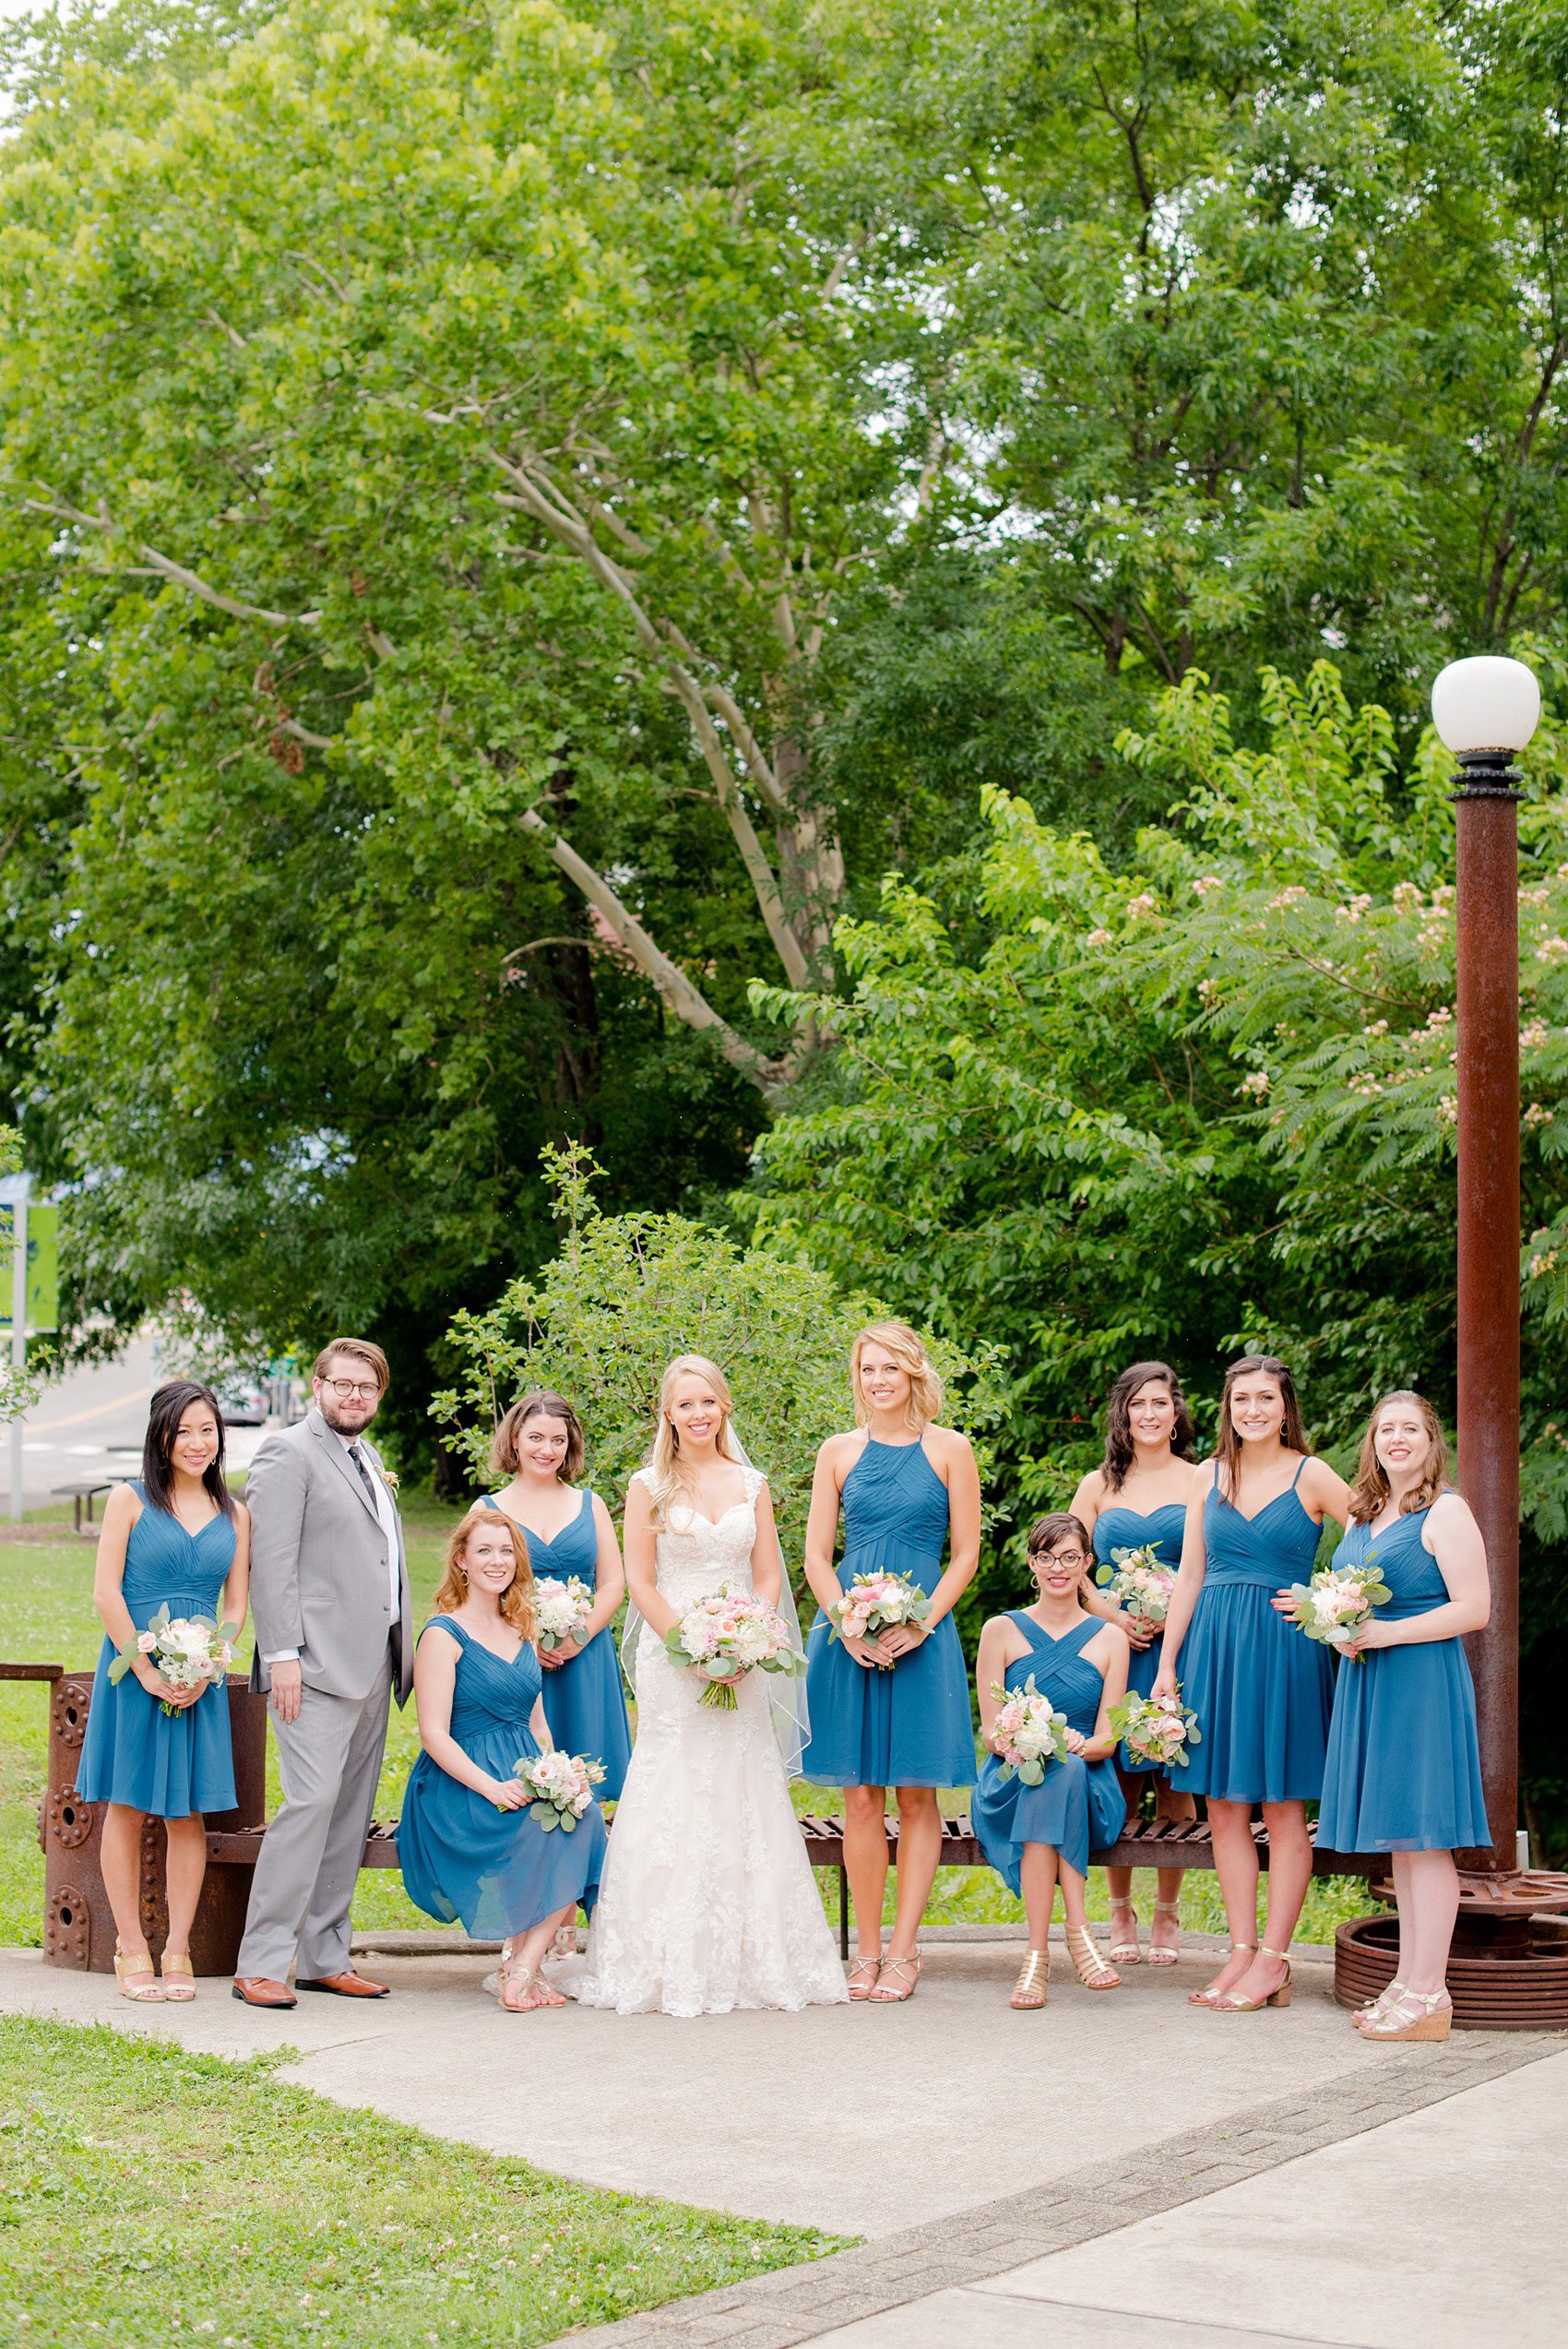 Mikkel Paige Photography photos from a wedding in Durham, North Carolina. Vogue like picture of the bridesmaids in teal dresses and a bridesdude in a grey suit.